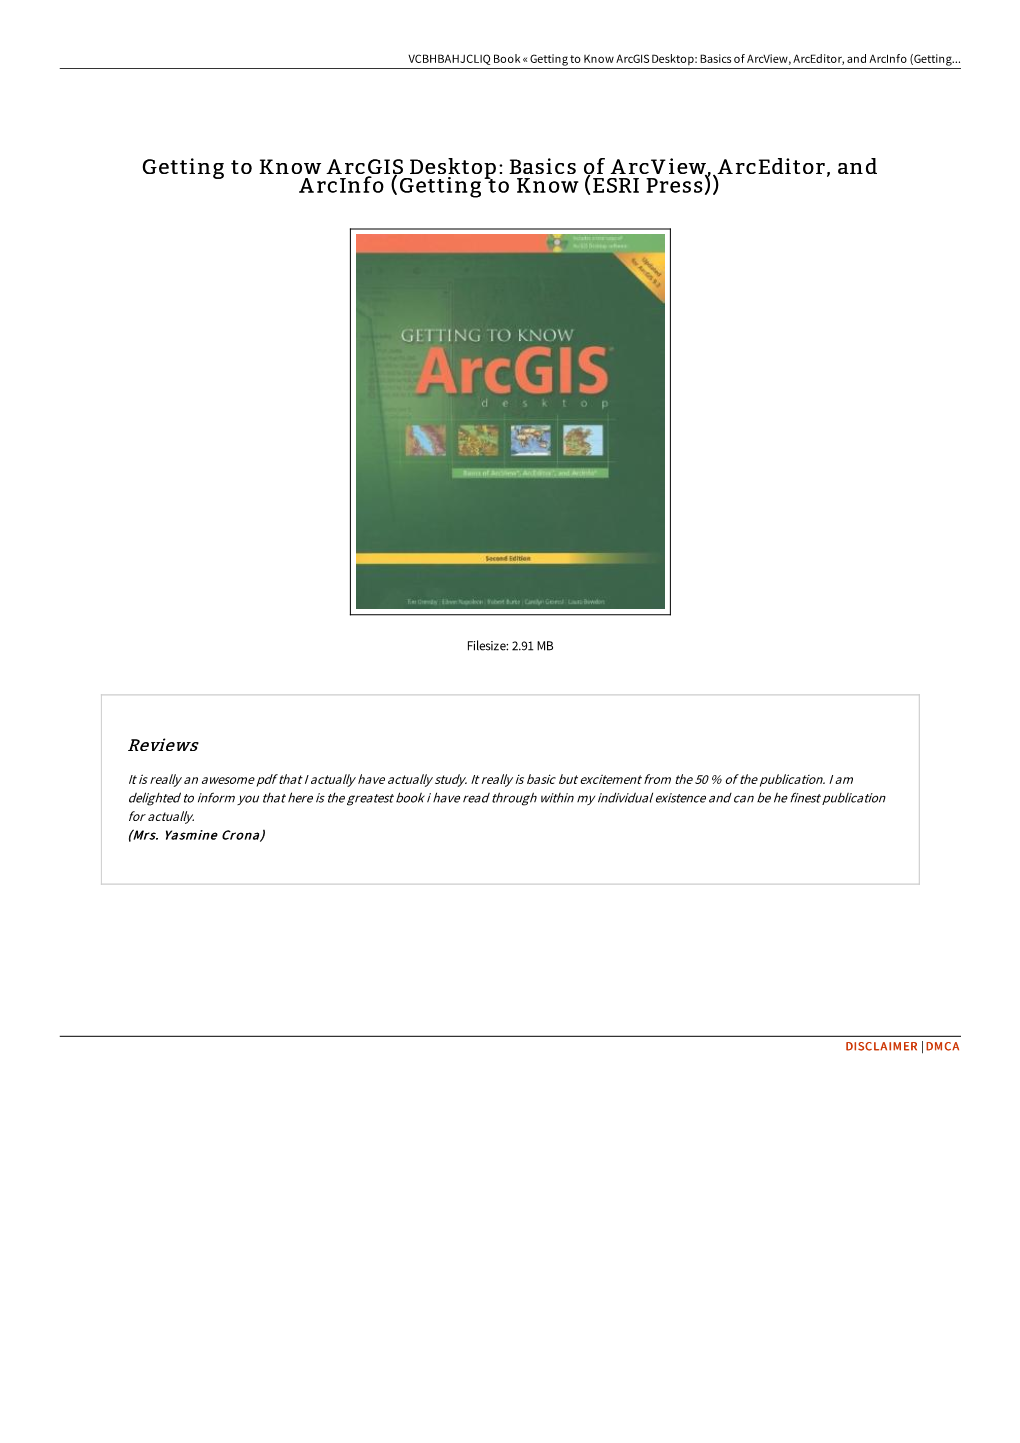 Getting to Know Arcgis Desktop: Basics of Arcview, Arceditor, and Arcinfo (Getting